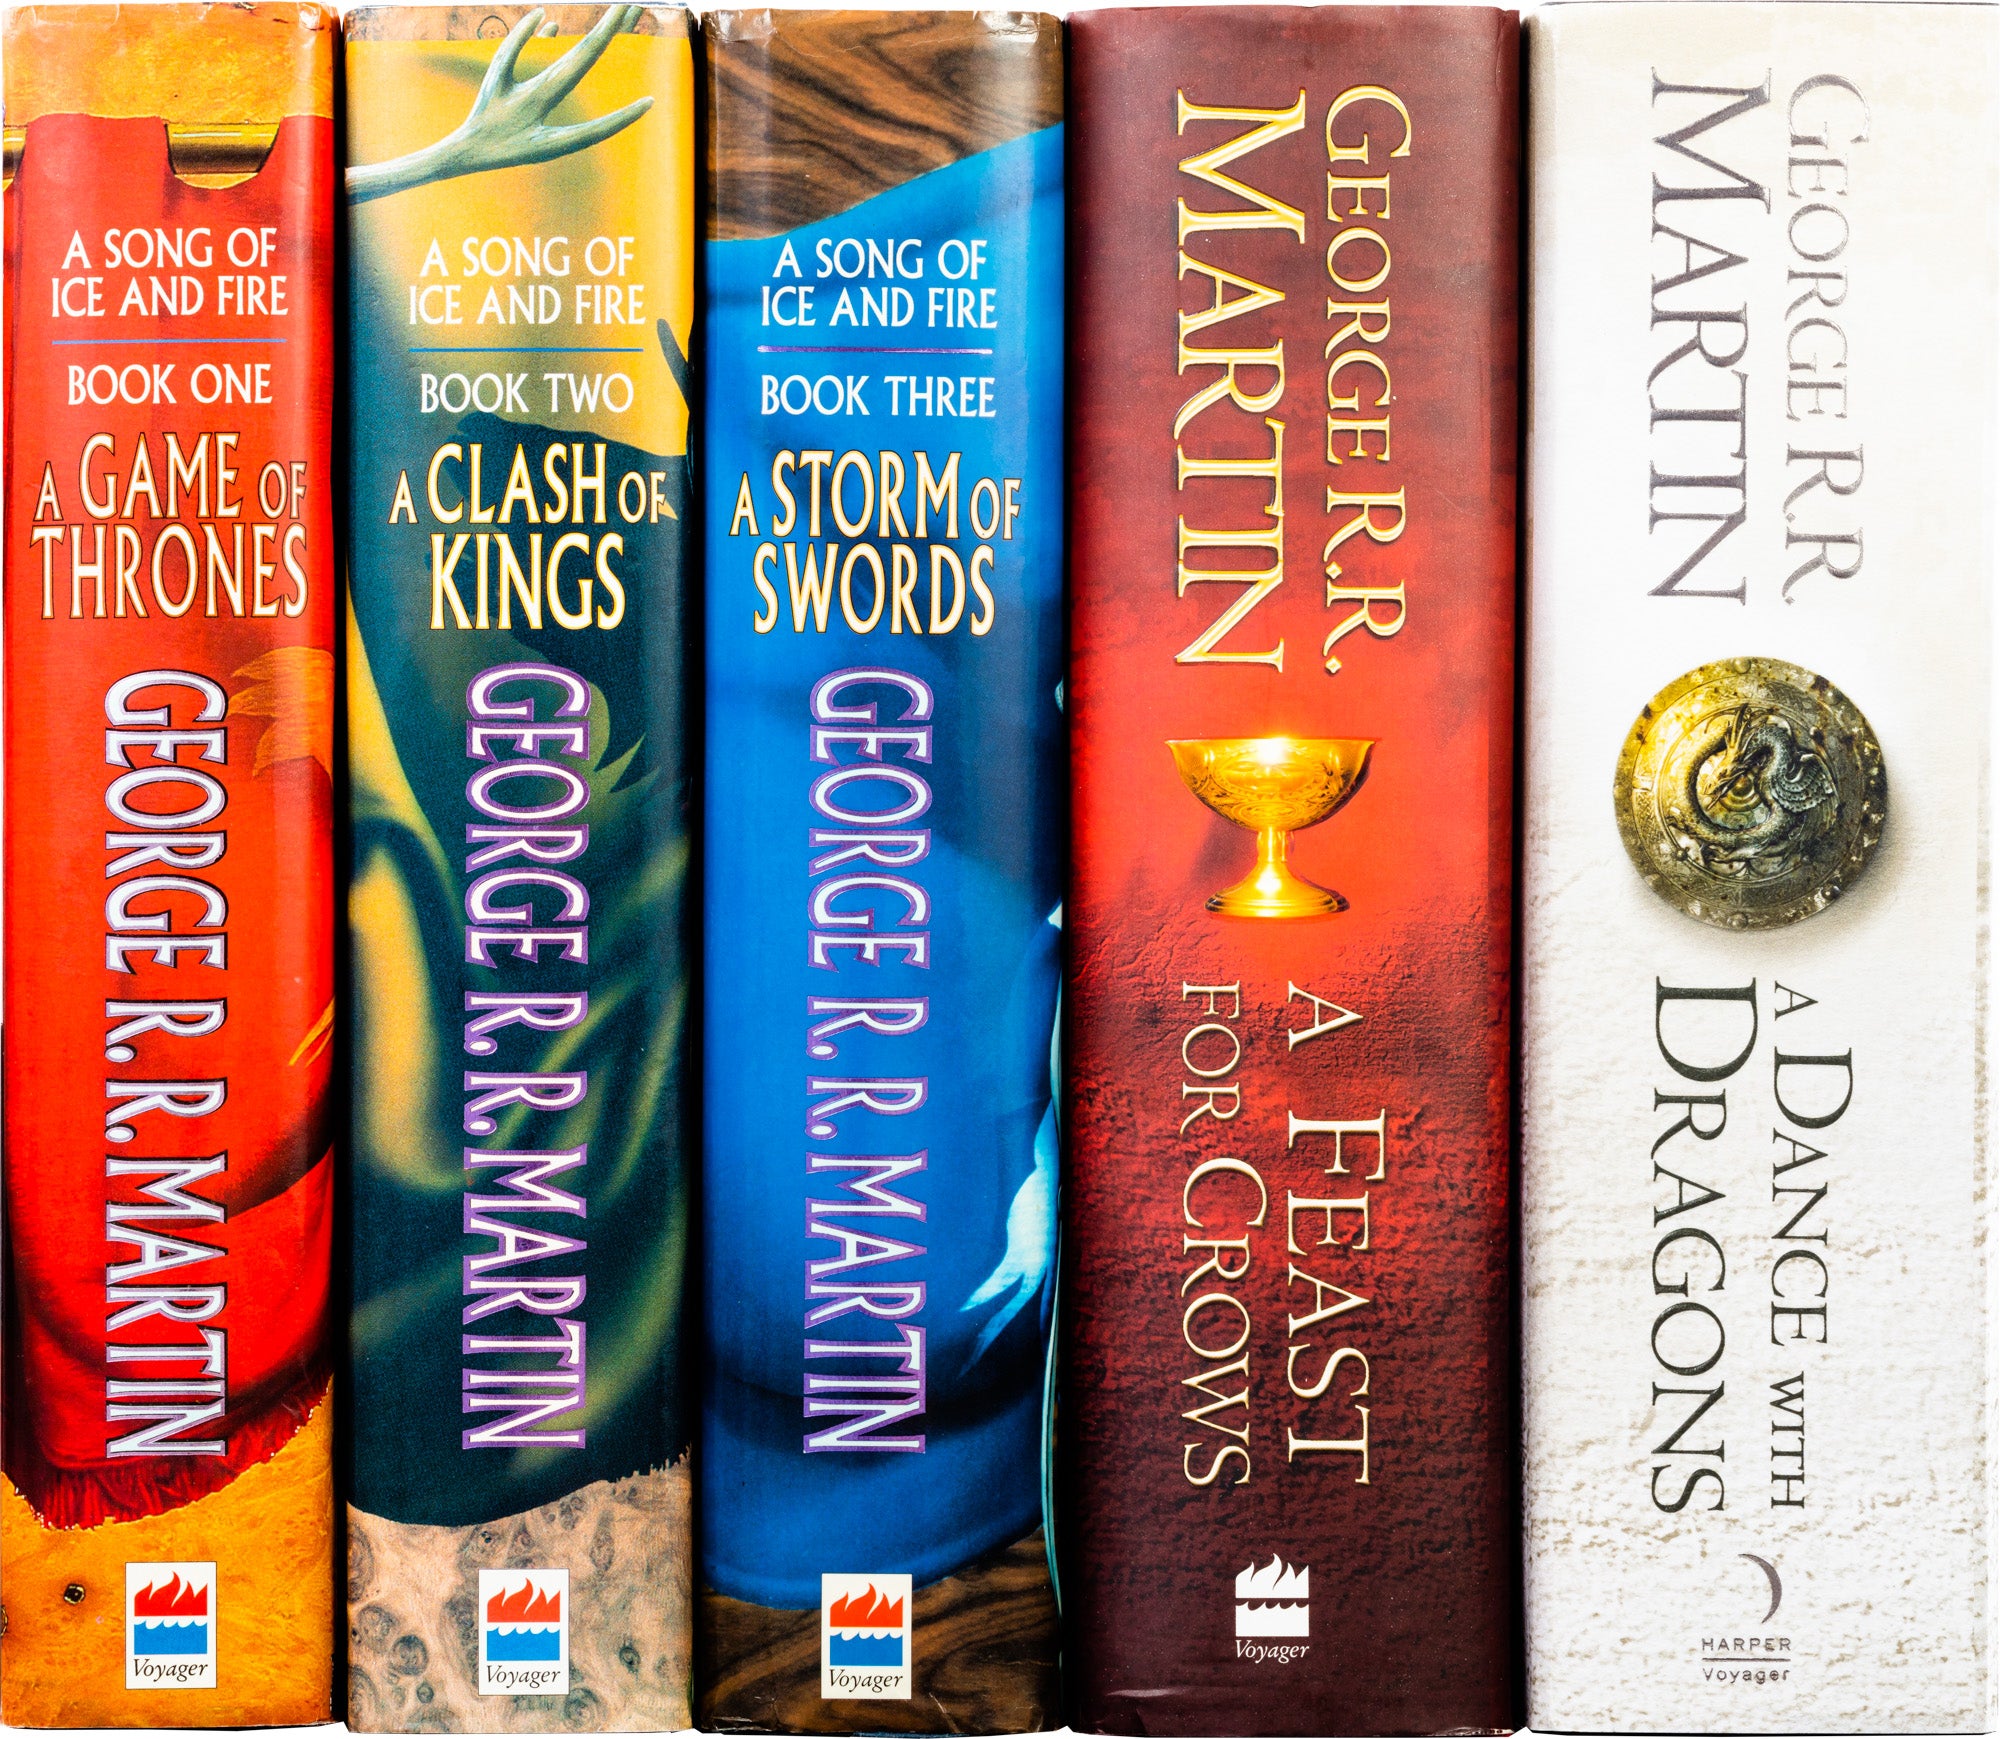 A Game of Thrones (A Song of Ice and by George R.R. Martin